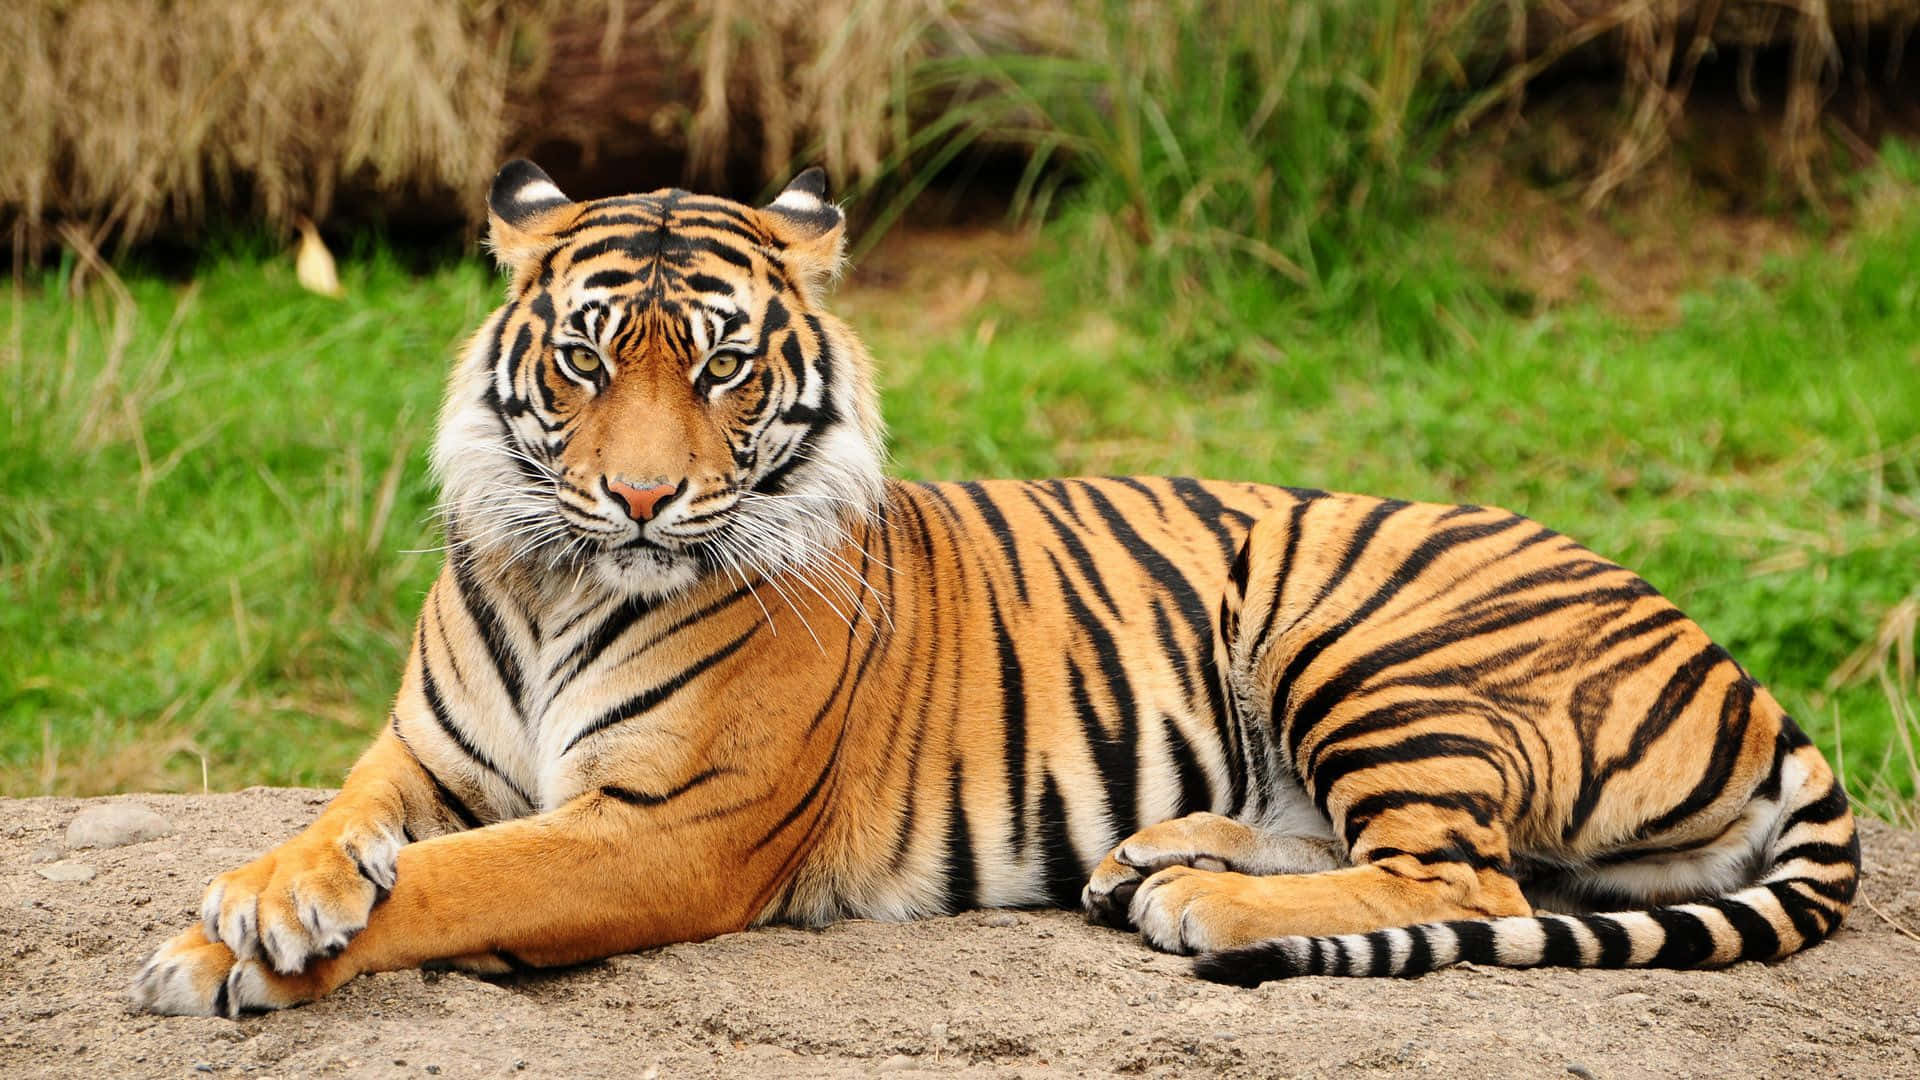 Indian Tiger Sitting On Grass Wallpaper